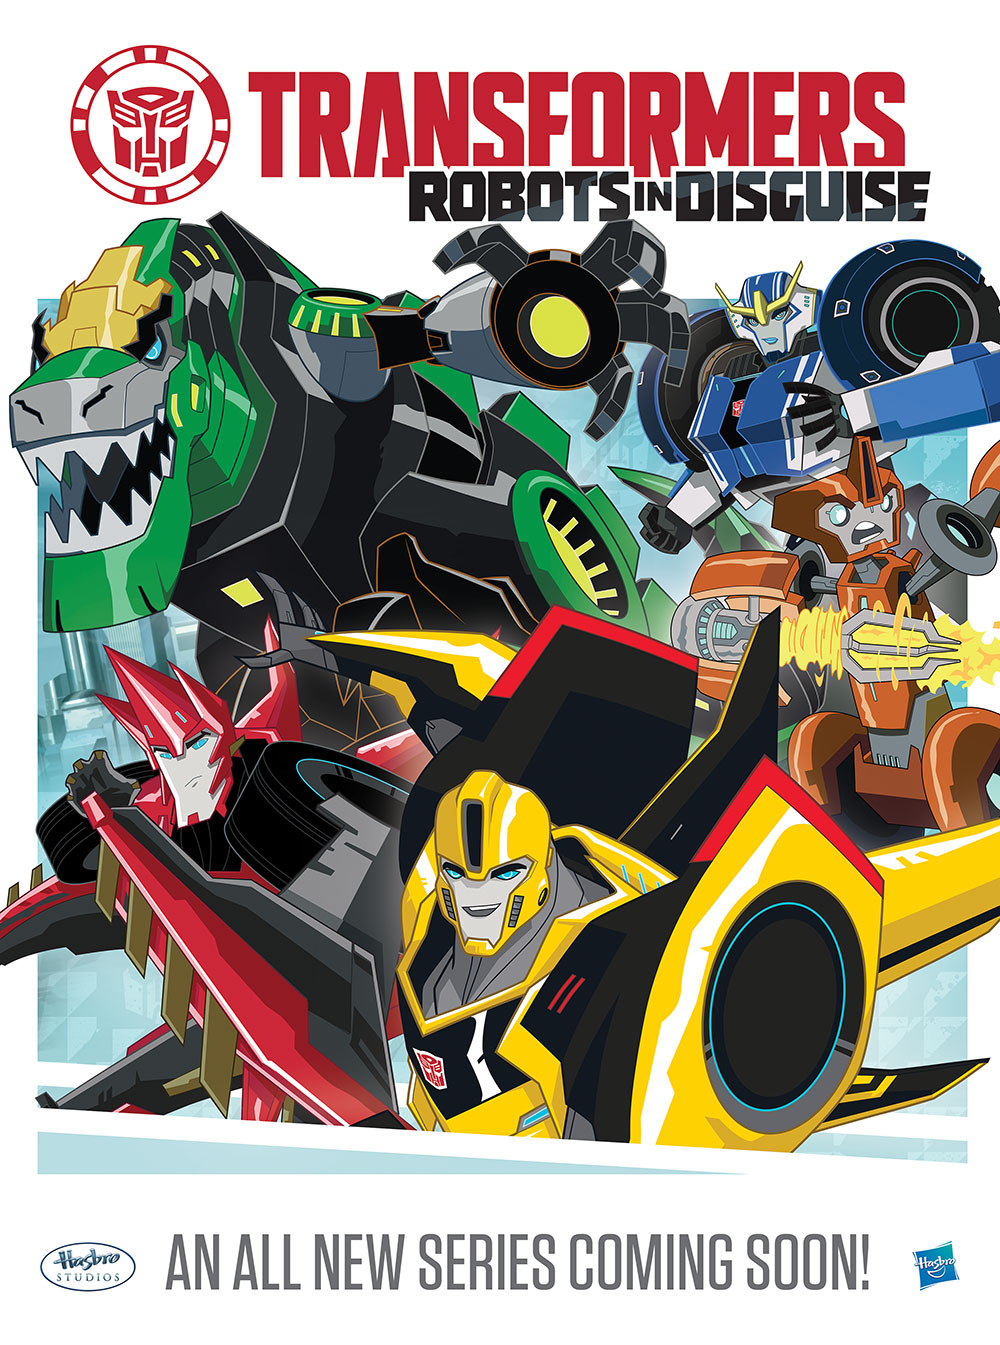 Transformers News: Press Release: TRANSFORMERS: Robots in Disguise Special Primetime Premiere Airs March 14th